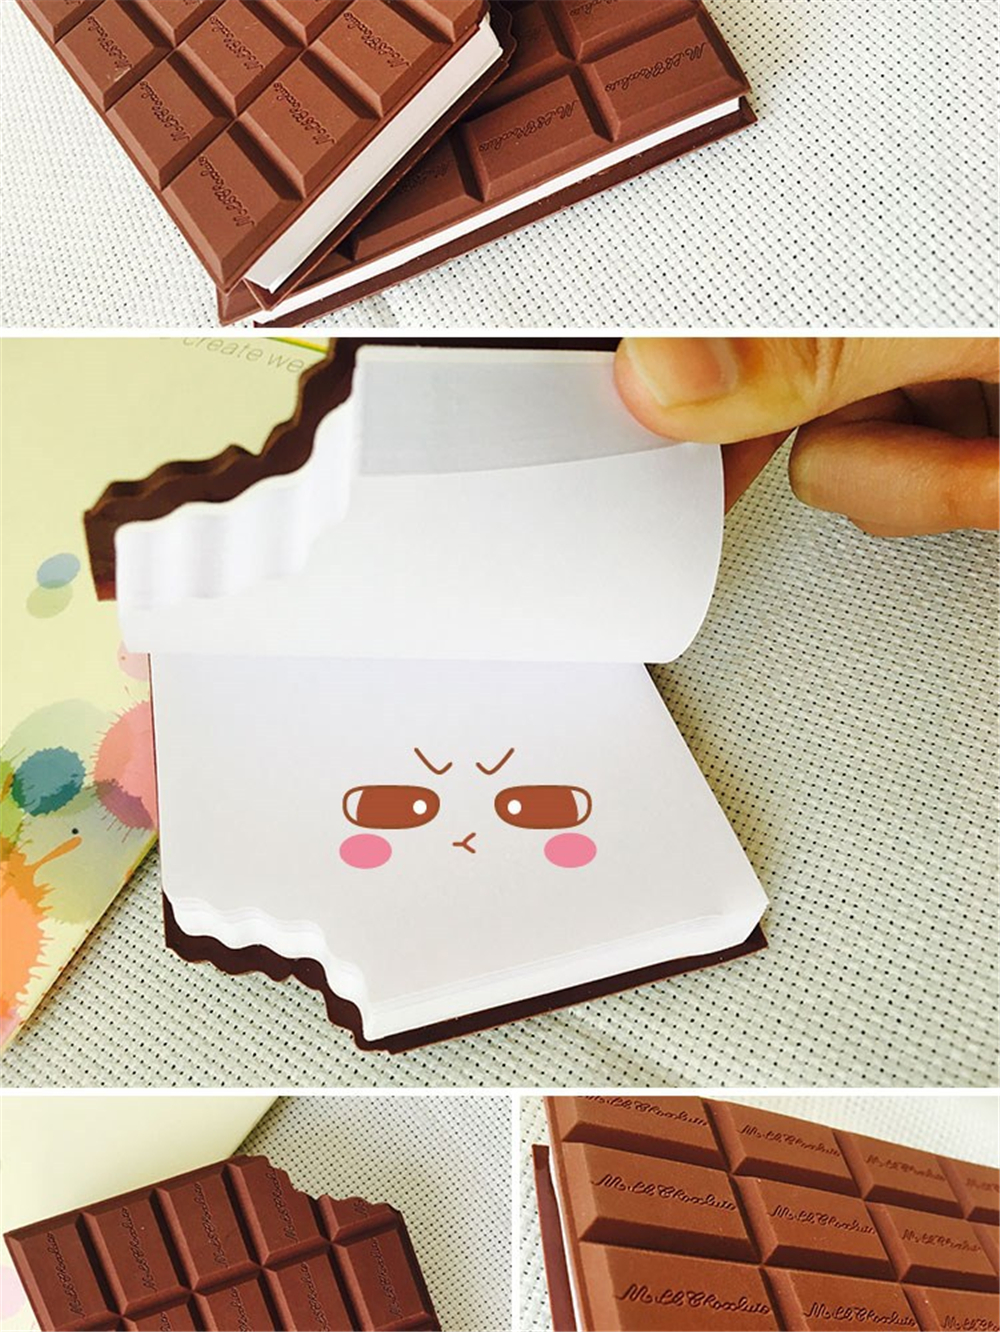 Chocolate-Stickers-Book-Creative-Chocolate-Cookies-Shape-Memo-Sticker-Pad-Dairy-Note-Notebook-For-Of-1764050-10